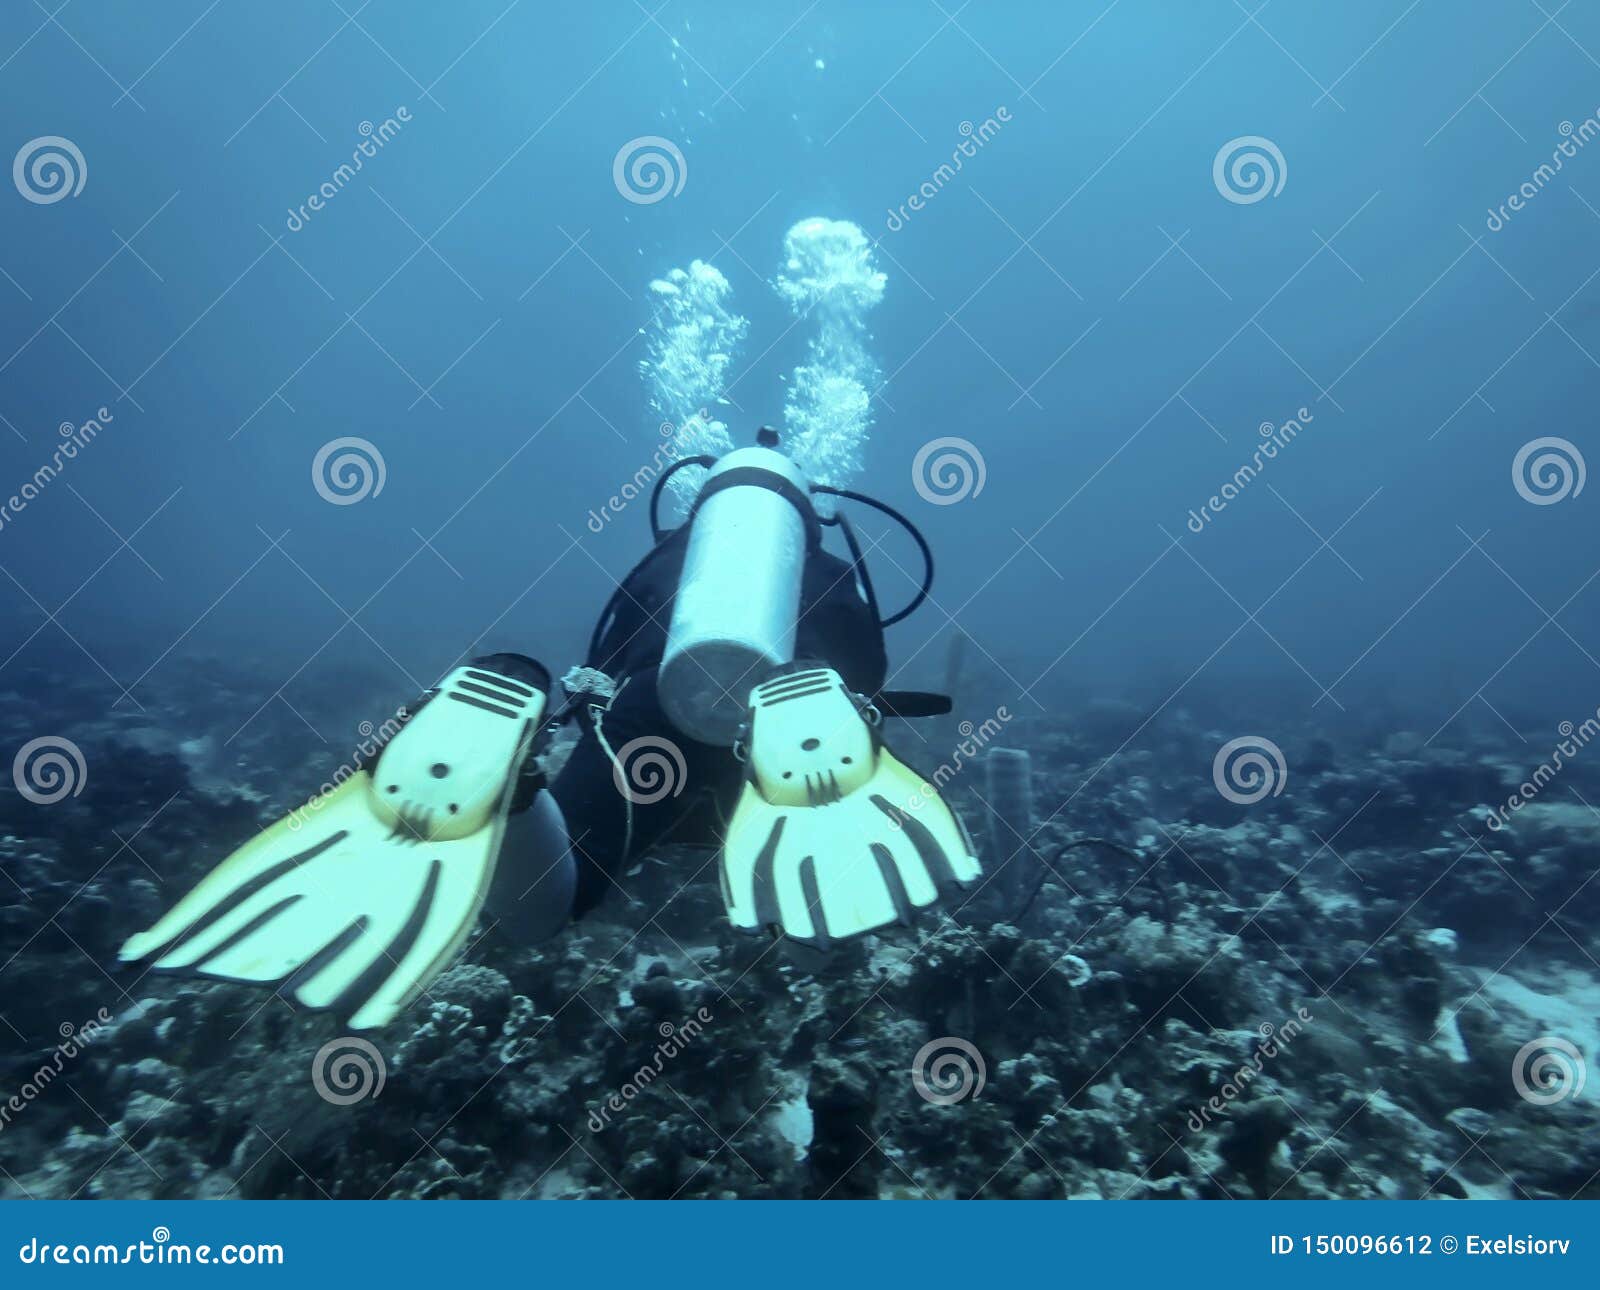 Underwater A Diver Swims In The Depths Near The Seabed Stock Photo Image Of Nature Reef